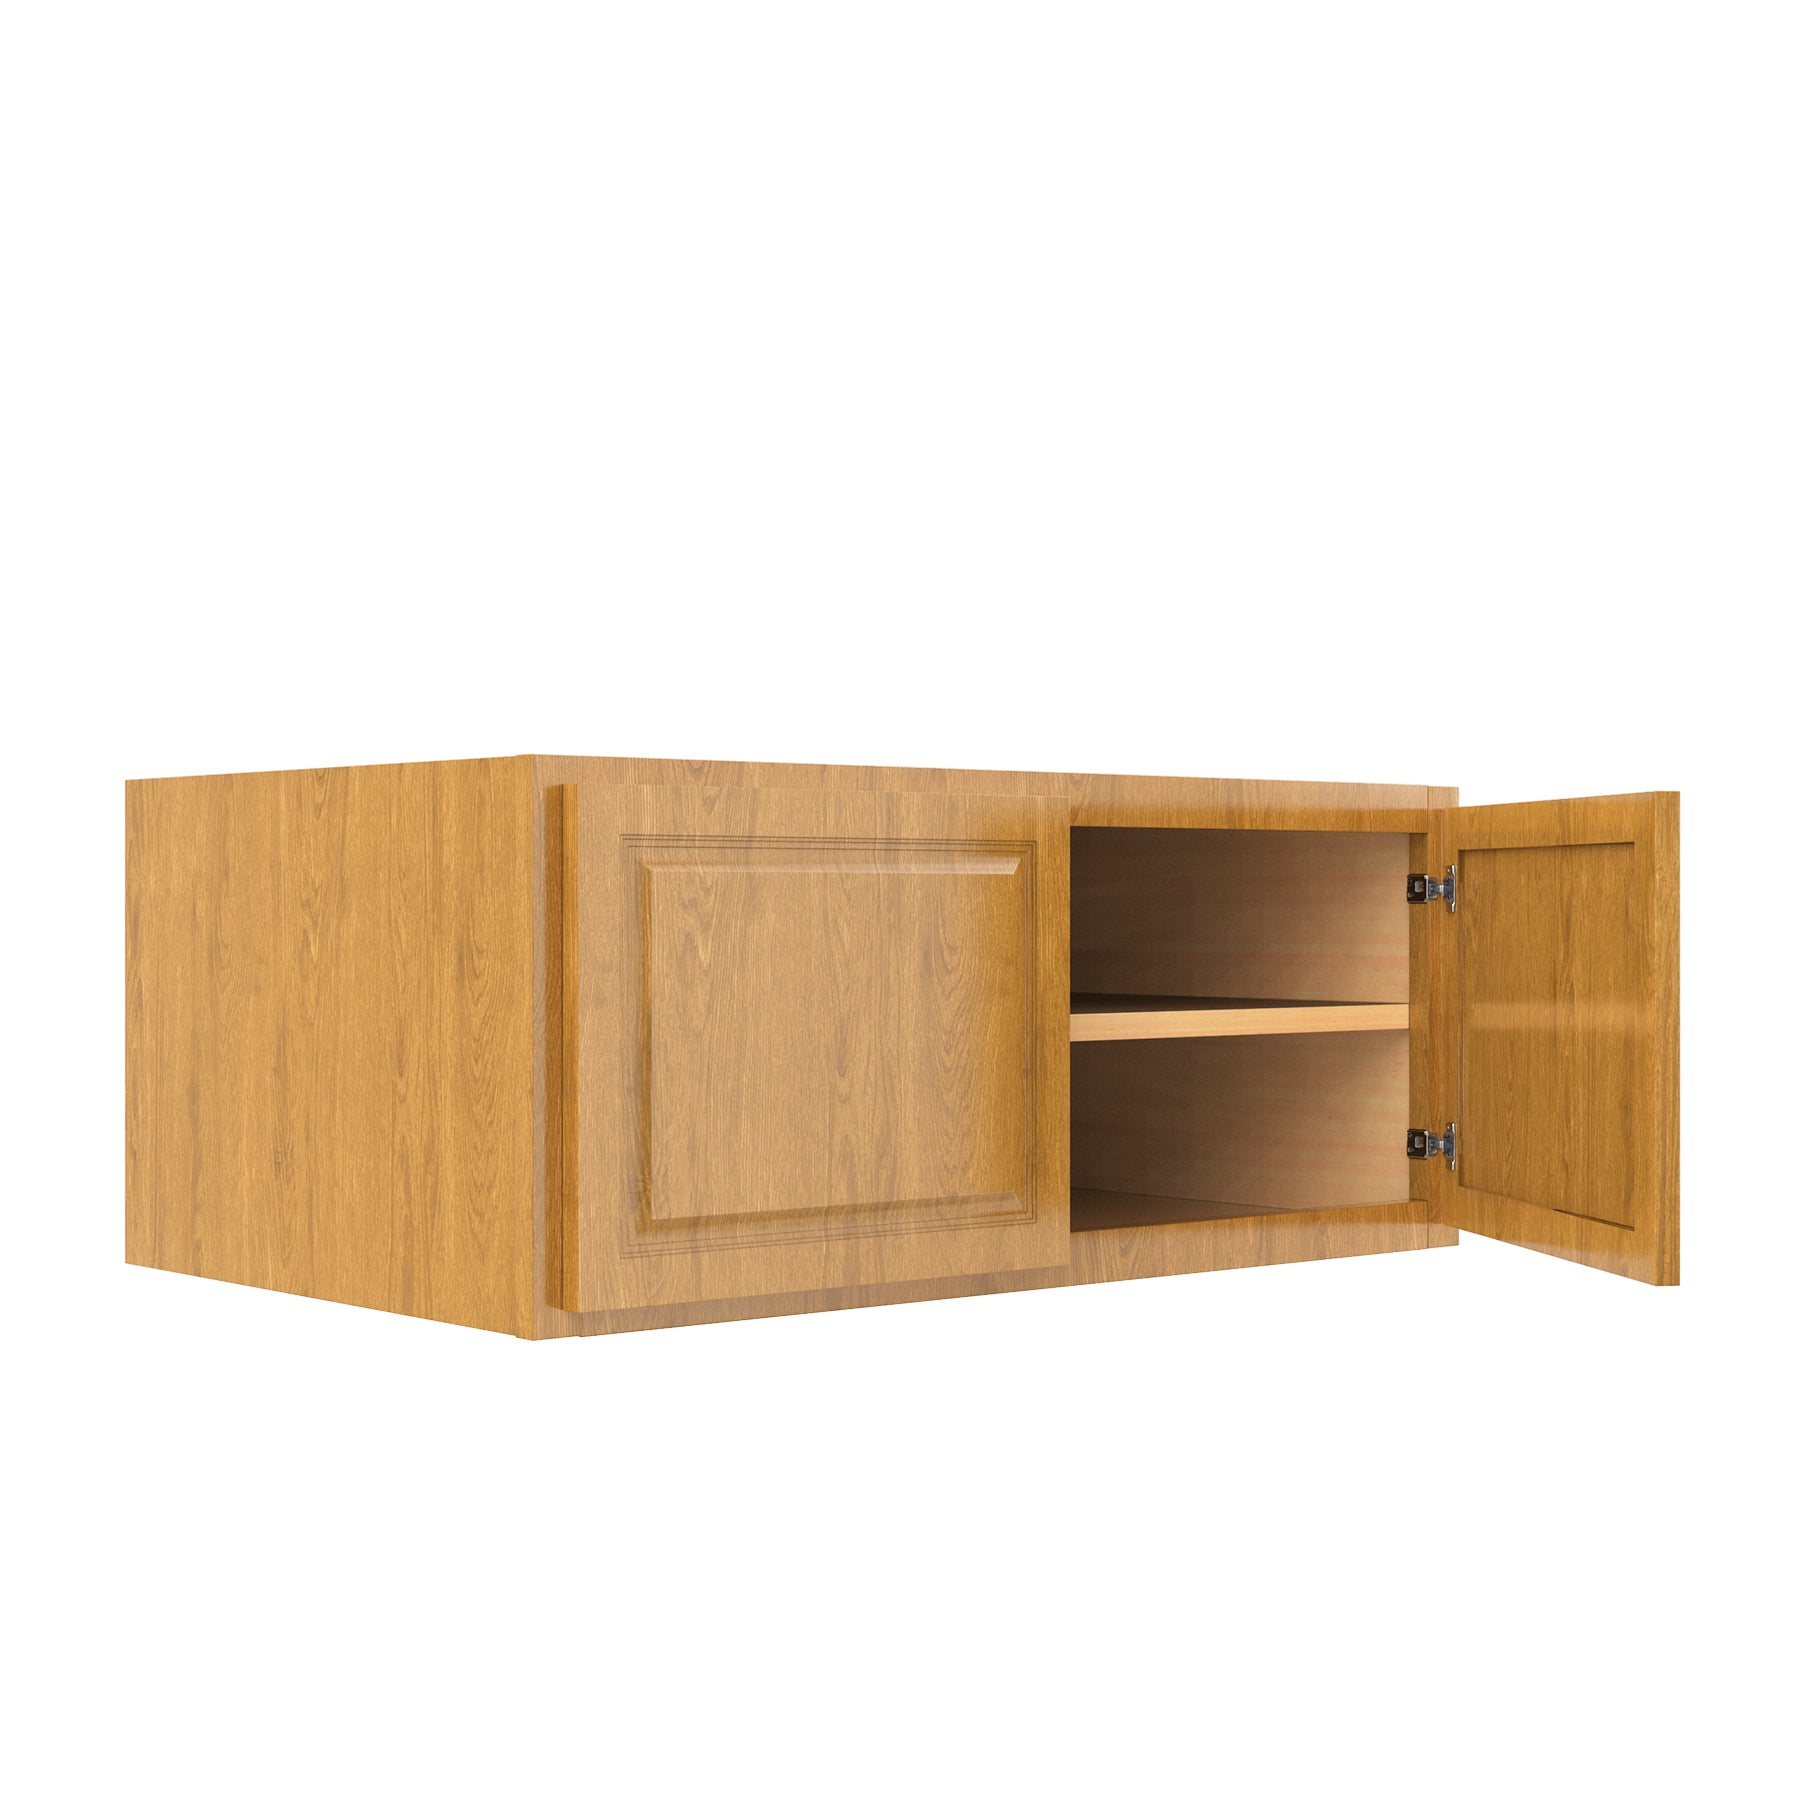 Country Oak 36"W x 15"H x 24"D Wall Cabinet